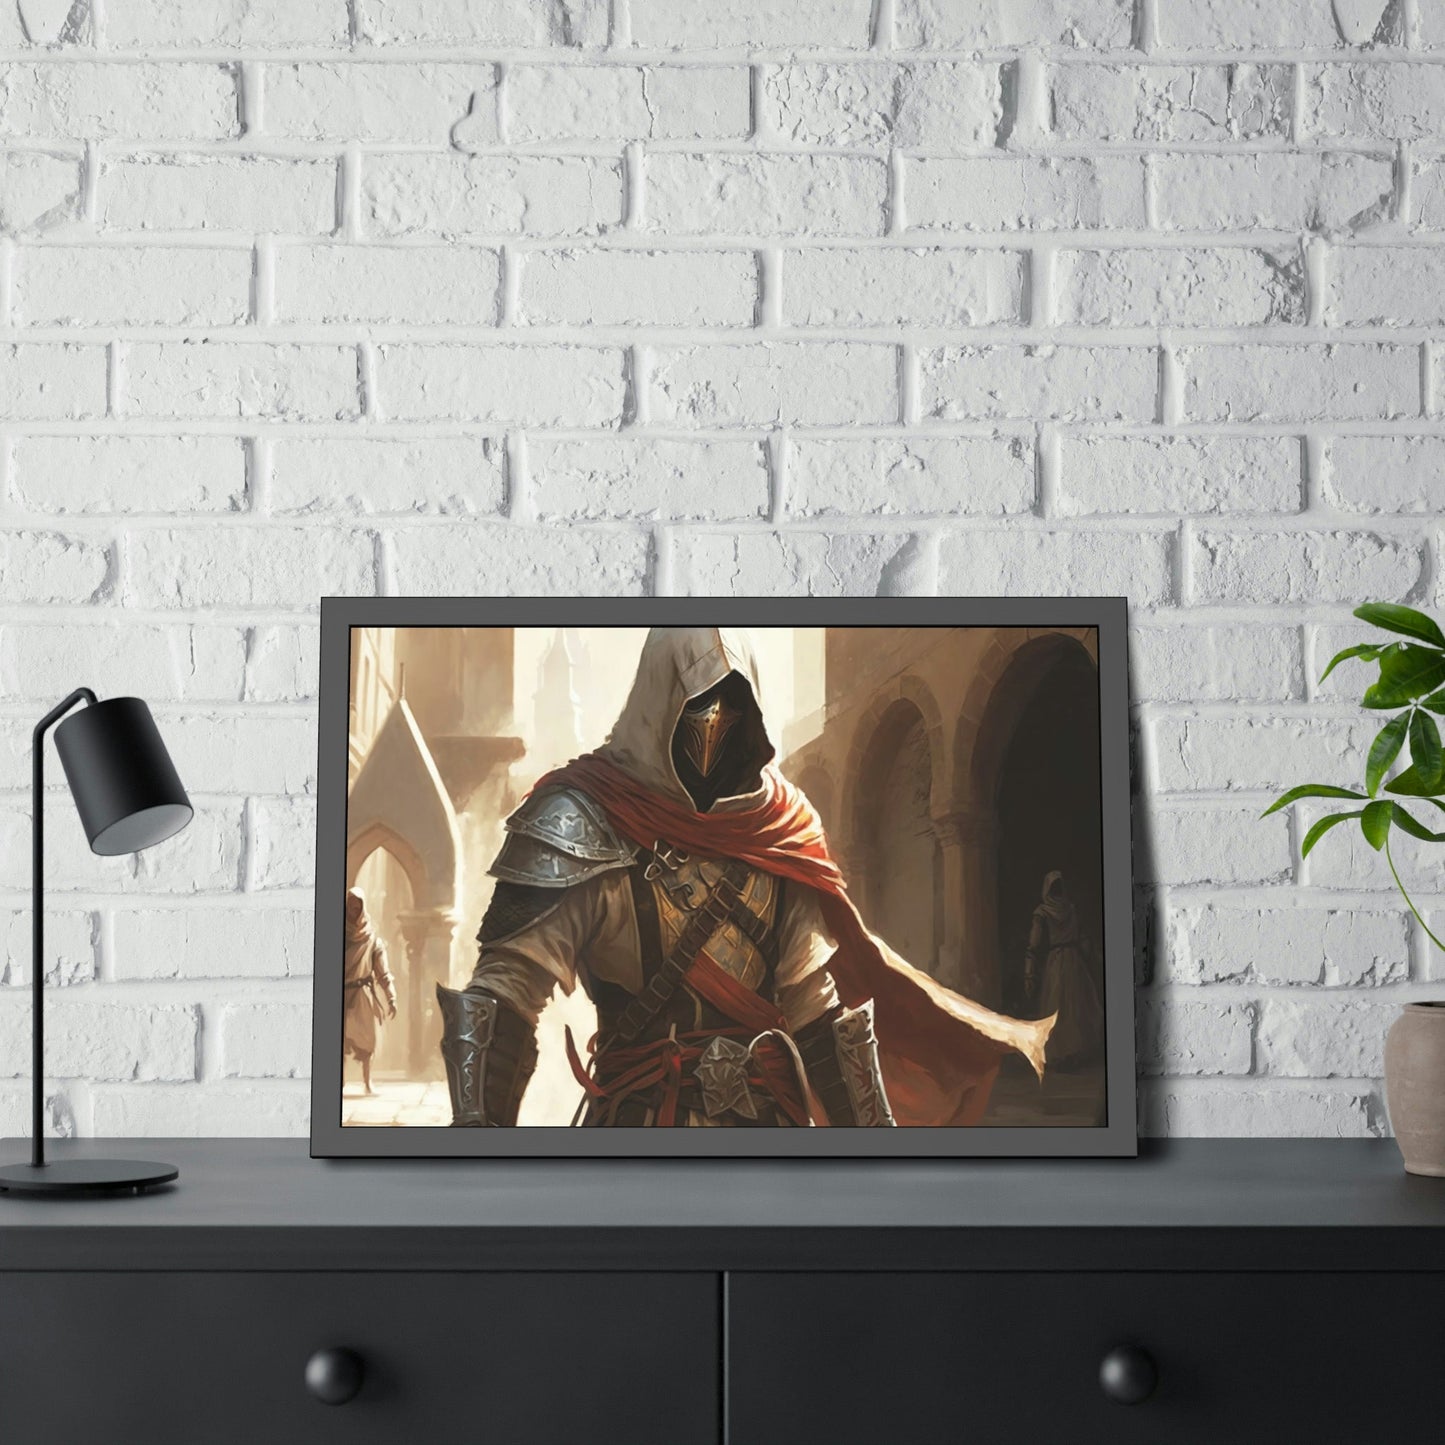 Altair Ibn-La'Ahad: Wall Art Print on Canvas & Poster of Assassin's Creed